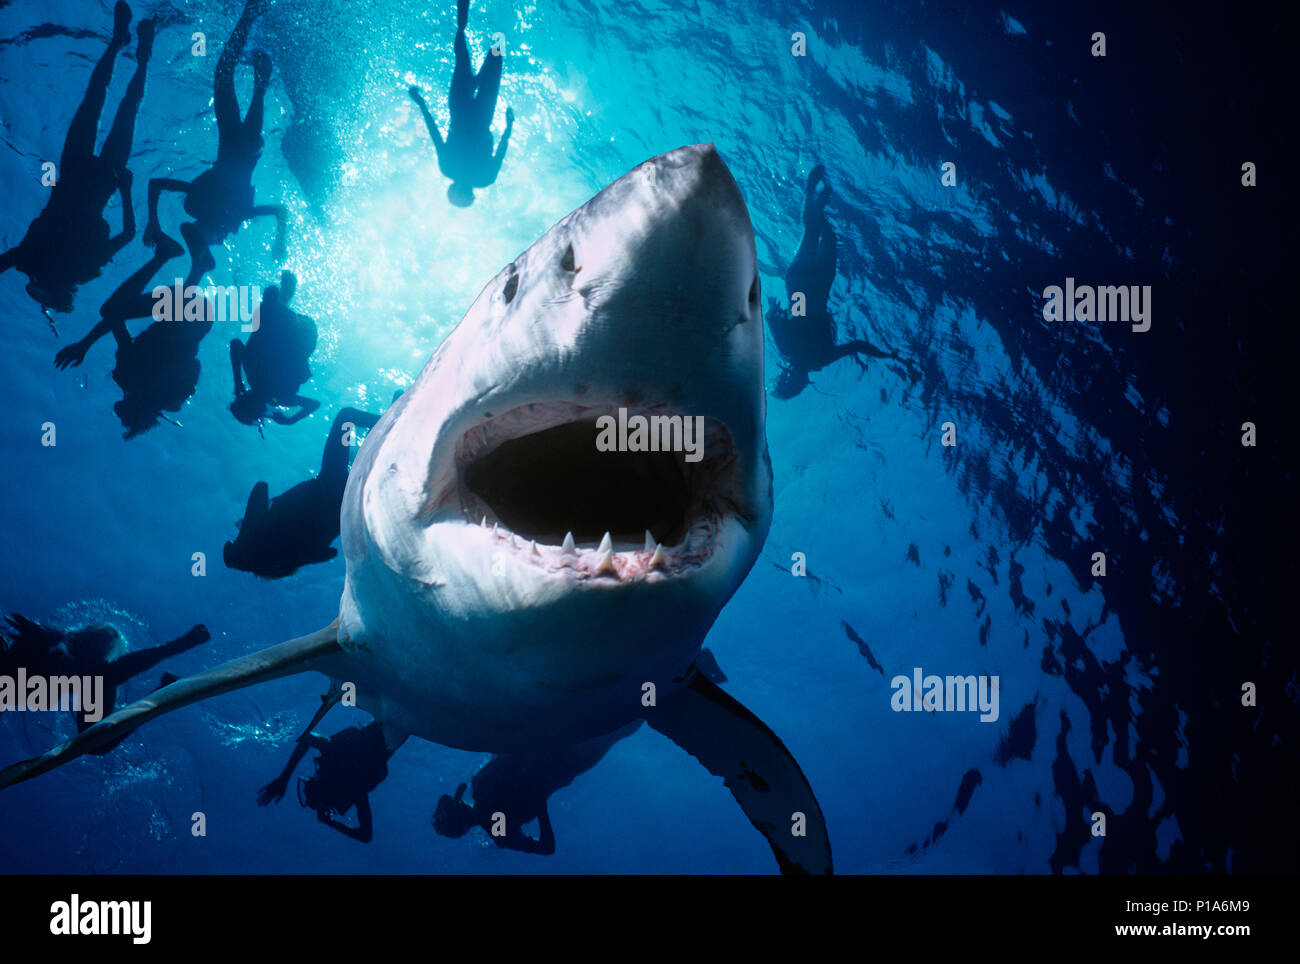 Great White Shark (Carcharodon carcharias), Guadalupe Island, Mexico - Pacific Ocean.   Image digitally altered to remove distracting or to add more i Stock Photo